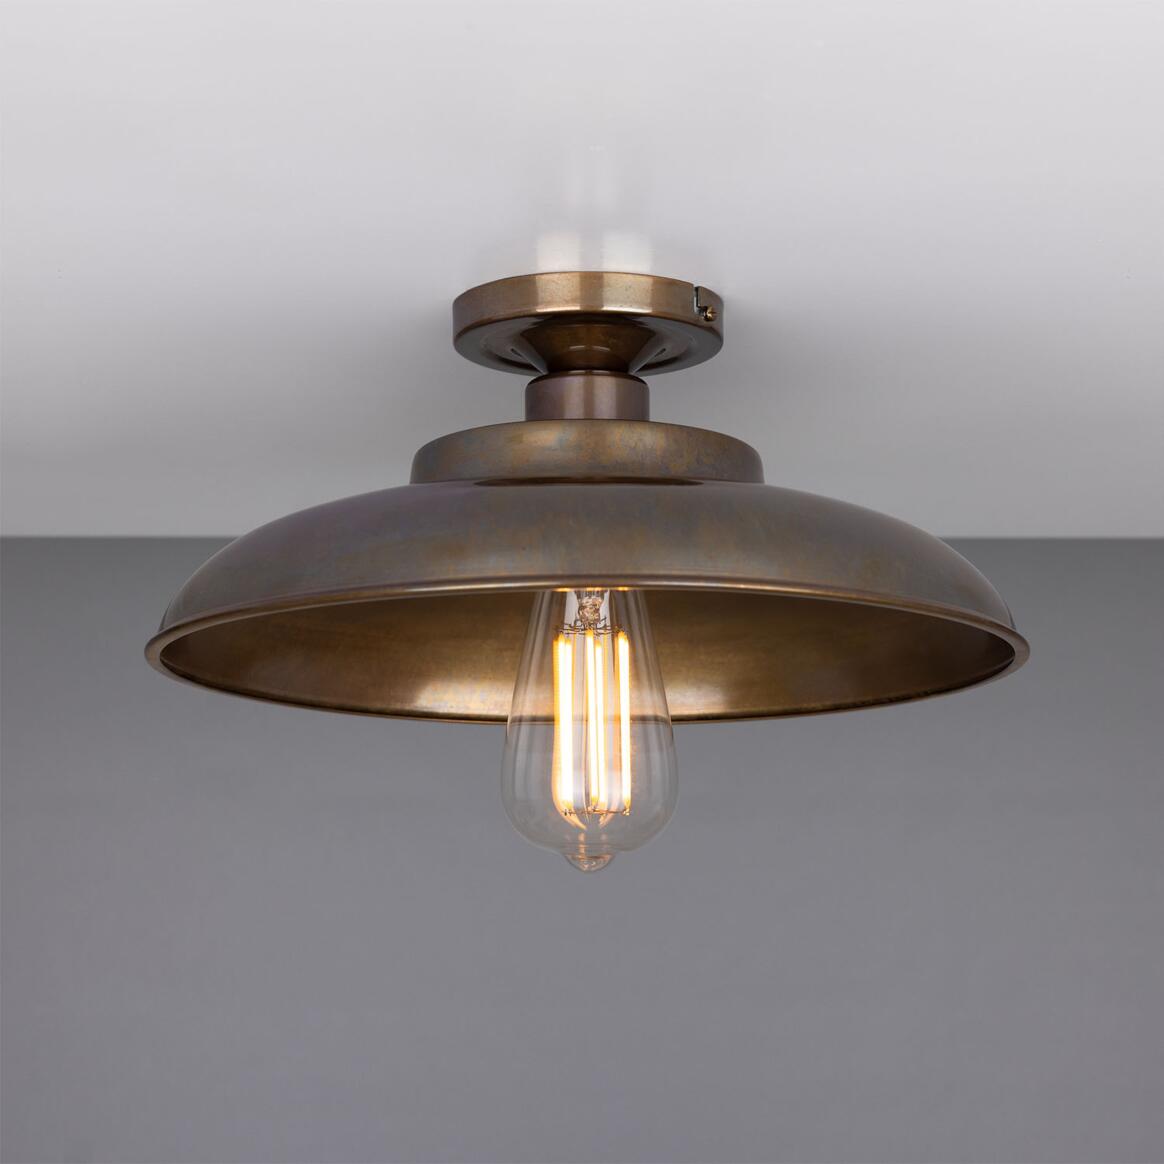 Telal Industrial Factory Flush Ceiling Light 32cm main product image